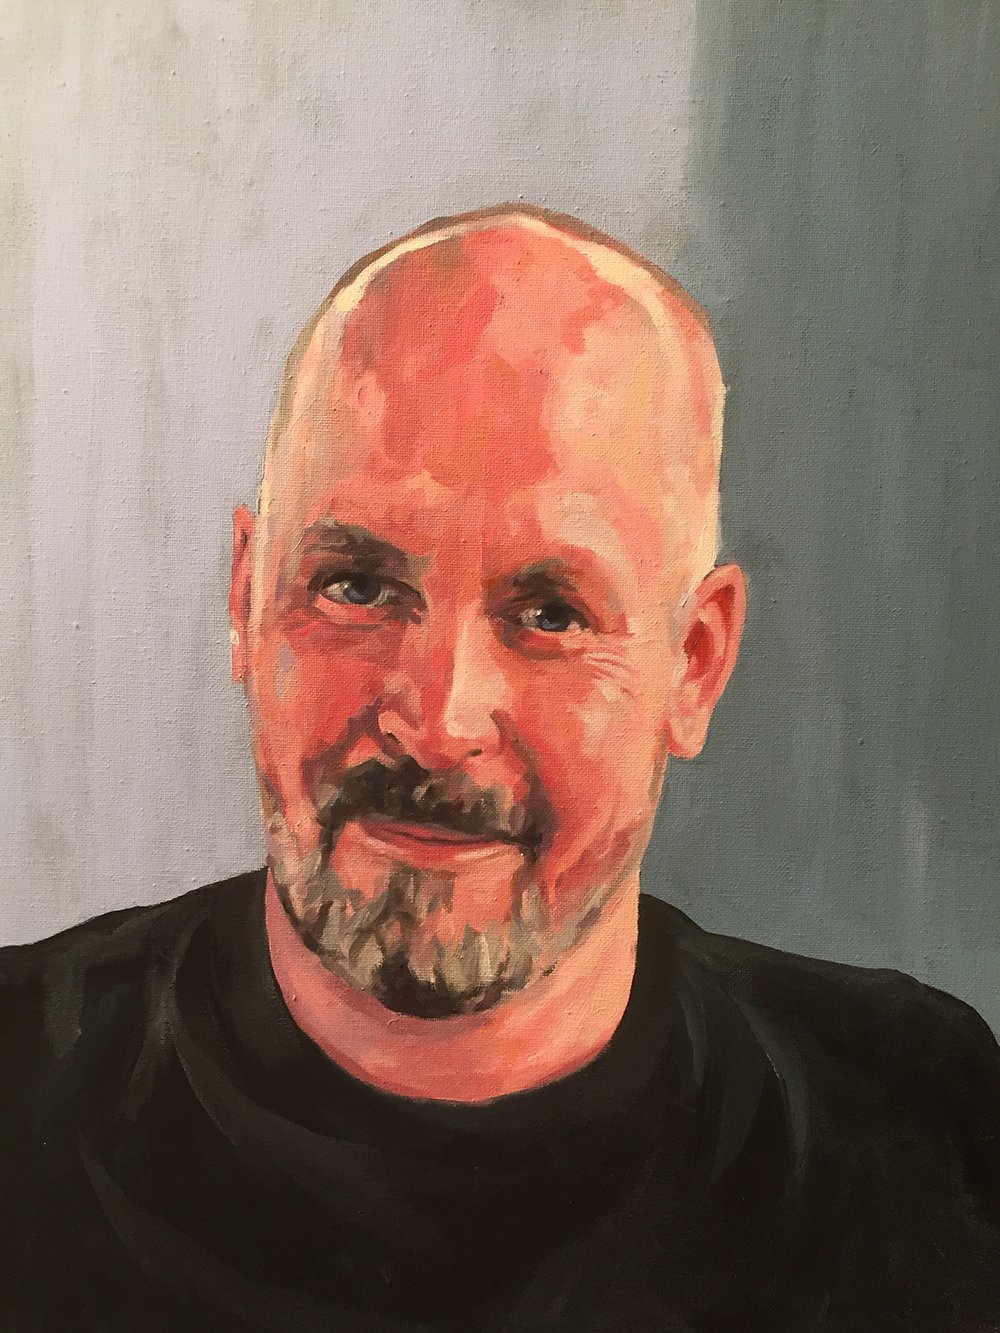 Commissioned Portrait of Ross, Oil on Canvas 16x20" by Jonathan Ing